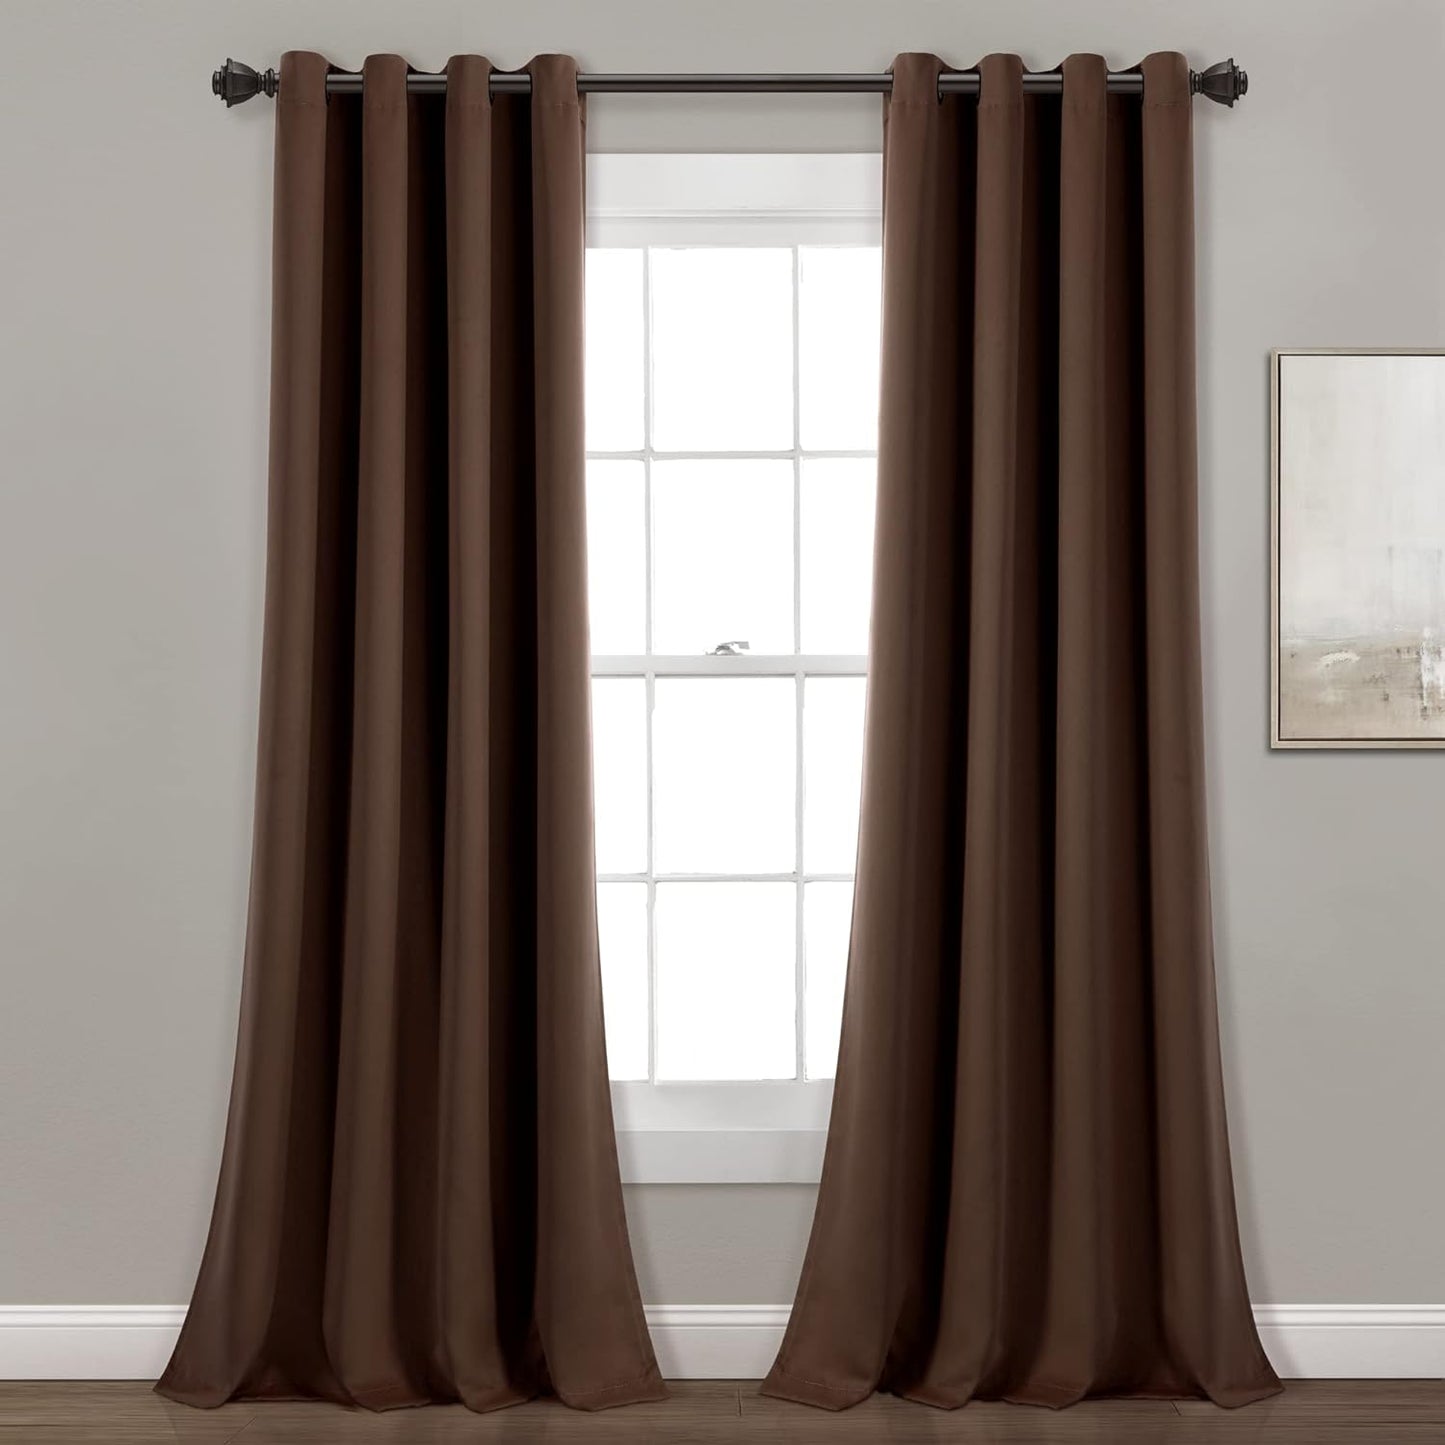 Lush Decor Insulated Grommet Blackout Window Curtain Panels, Pair, 52" W X 120" L, Wheat - Classic Modern Design - 120 Inch Curtains - Extra Long Curtains for Living Room, Bedroom, or Dining Room  Triangle Home Fashions Chocolate 52"W X 84"L 